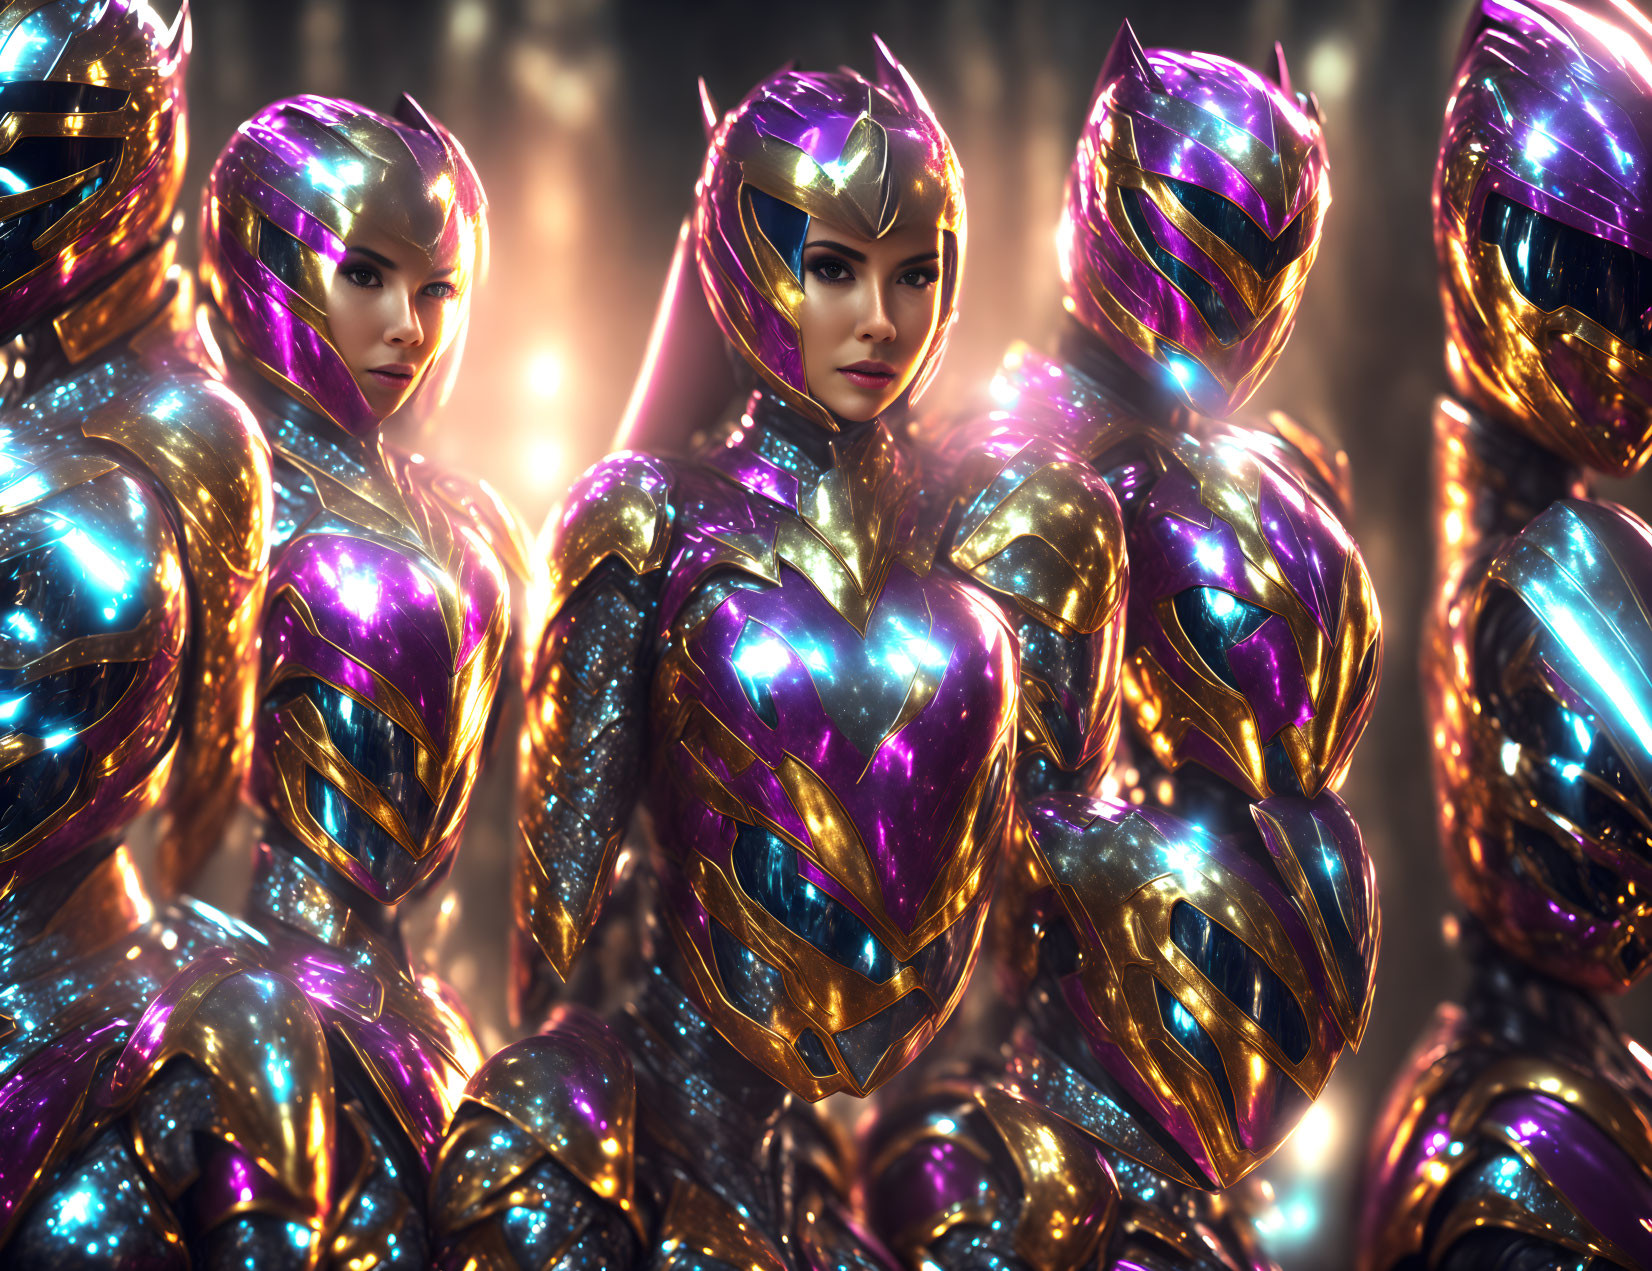 Futuristic warriors in reflective purple and gold armor pose confidently